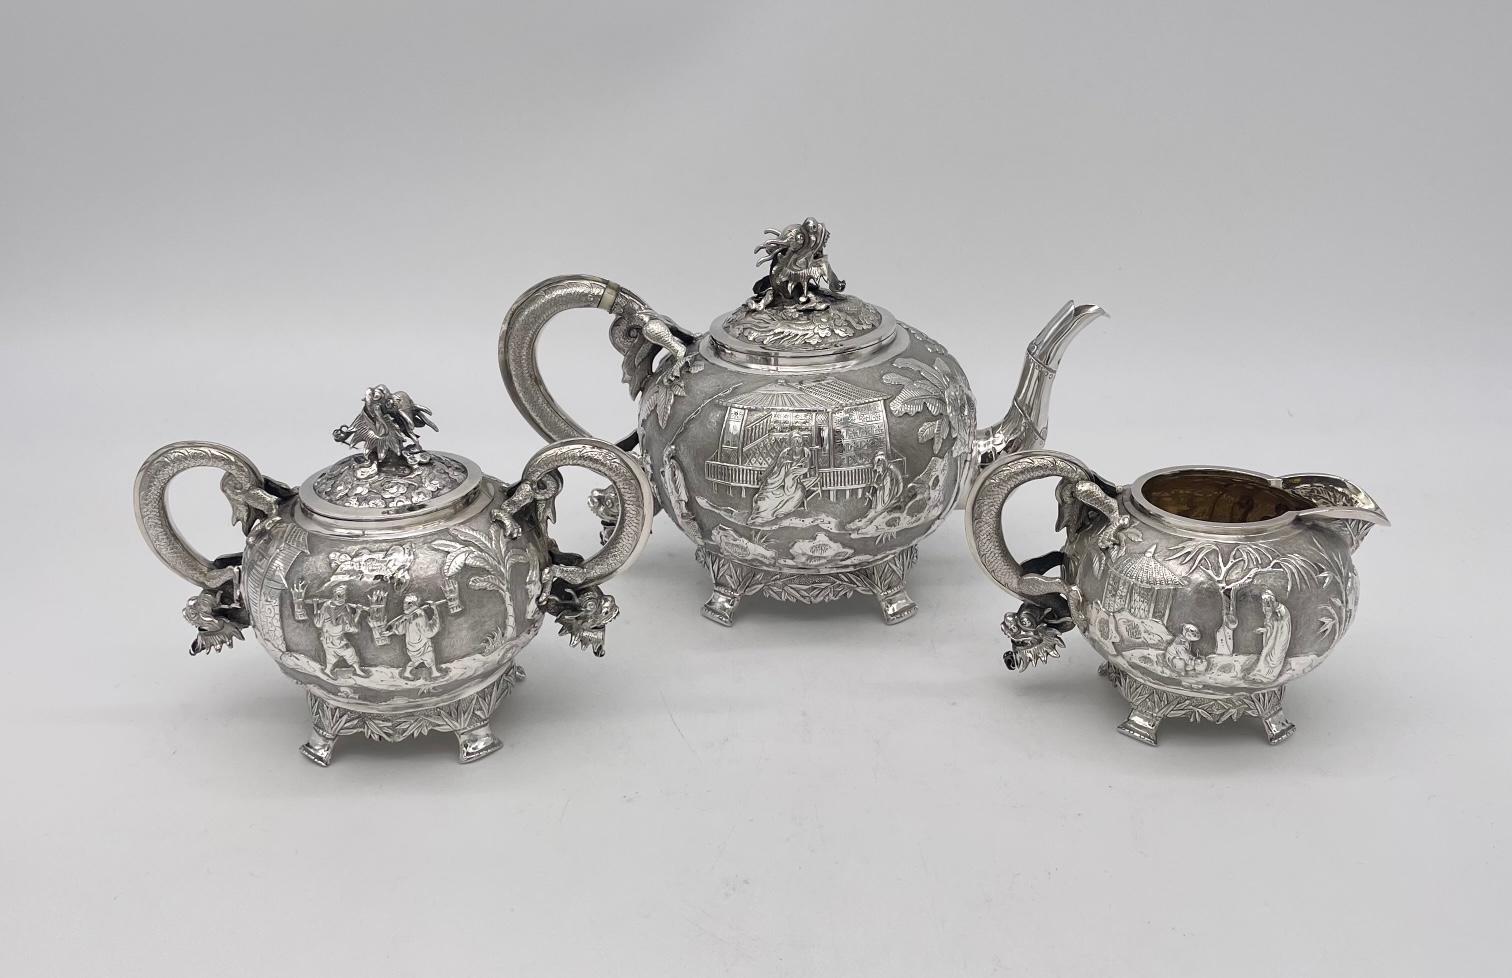 A Chinese Export Silver Teaset, of round form, with dragon handles and finials, and bamboo feet. This delightful three piece teaset is beautifully decorated with figural scenes and is a lovely example of the Chinese silversmith  良生 (Liangsheng) who